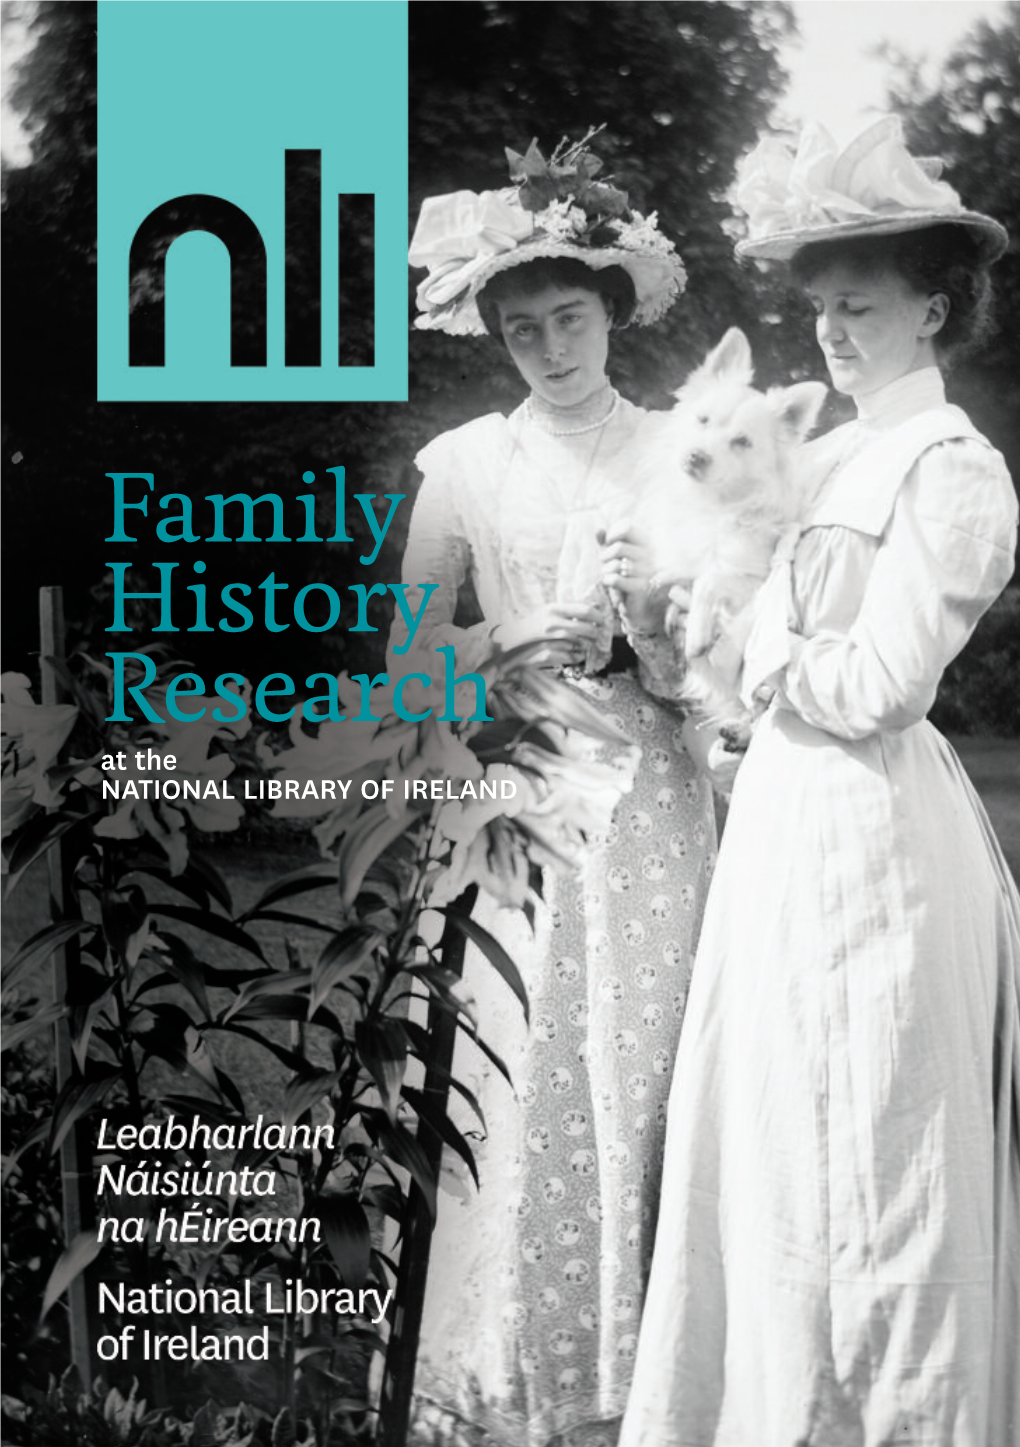 Family History Research at the NATIONAL LIBRARY of IRELAND Getting Started